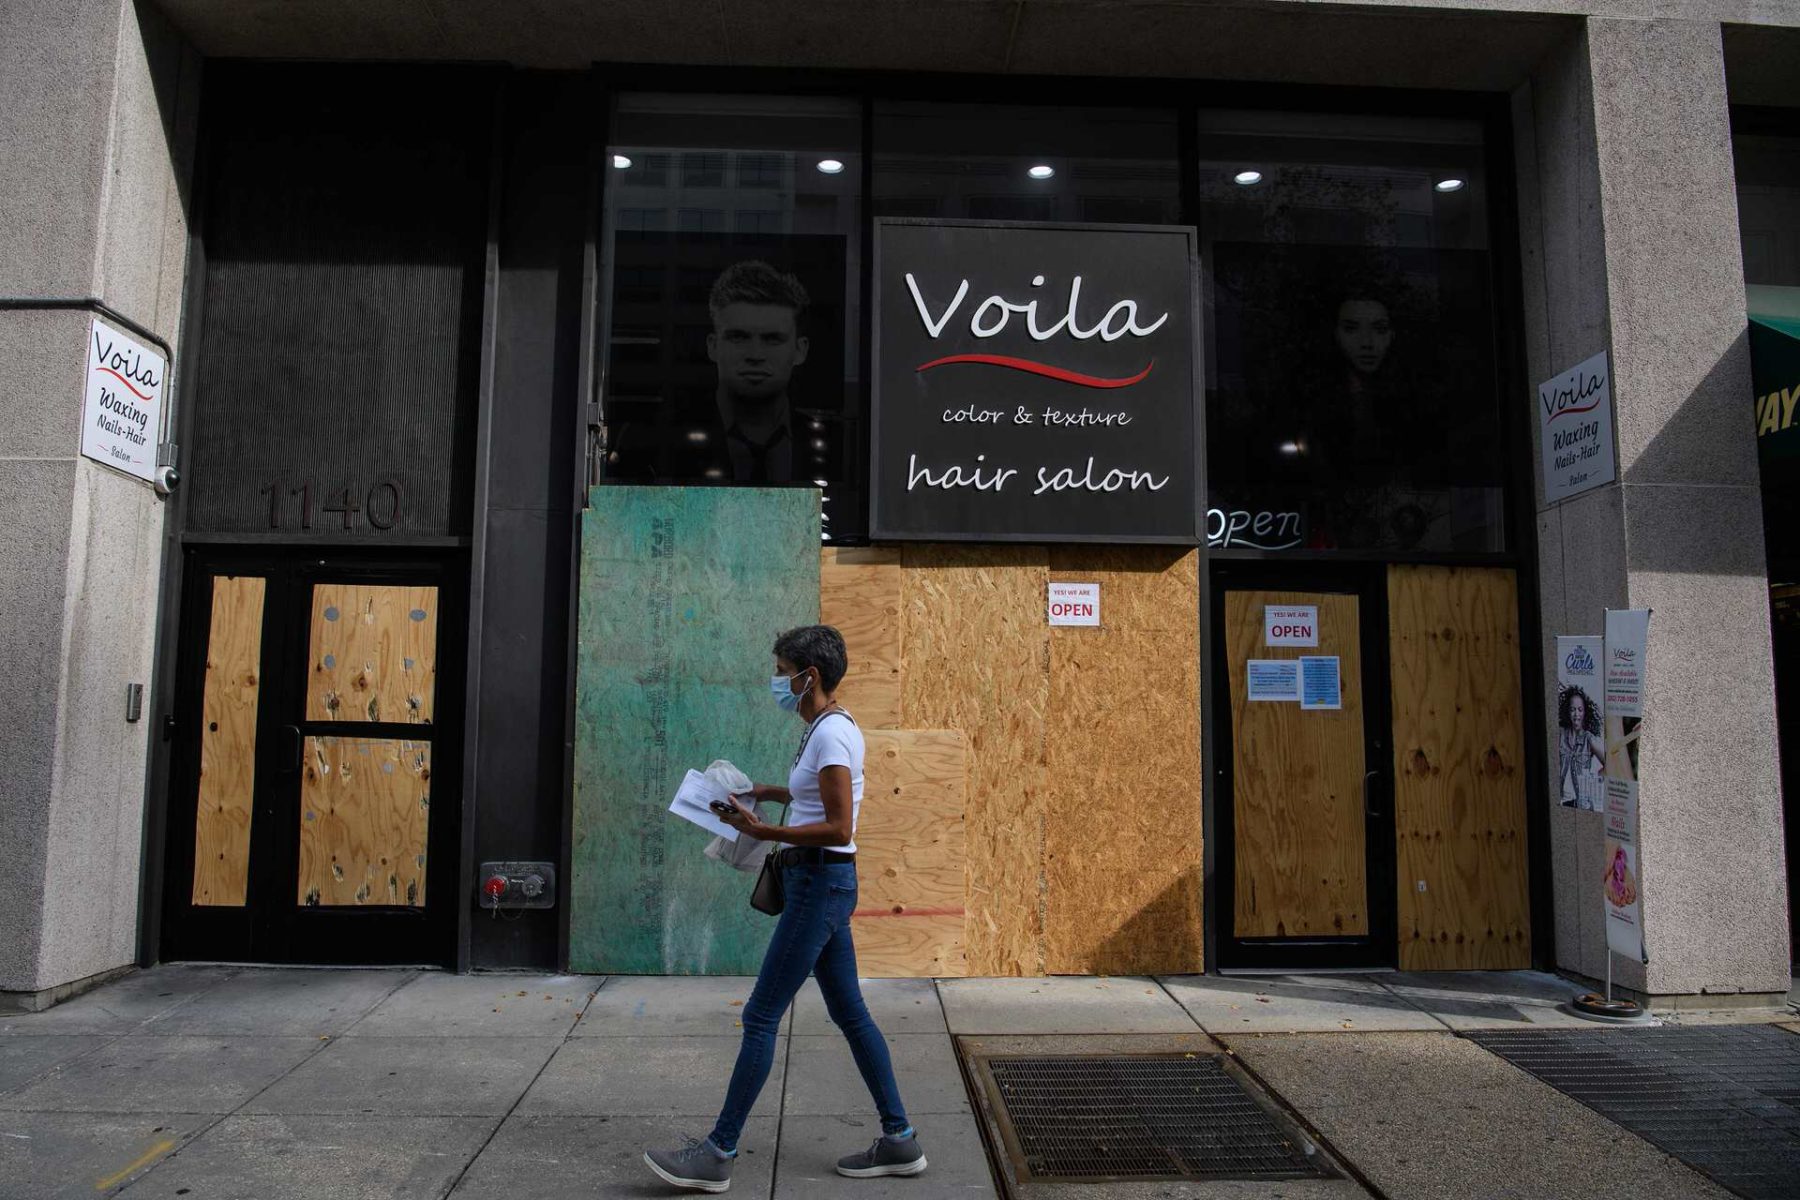 A woman walks by a boarded up business.